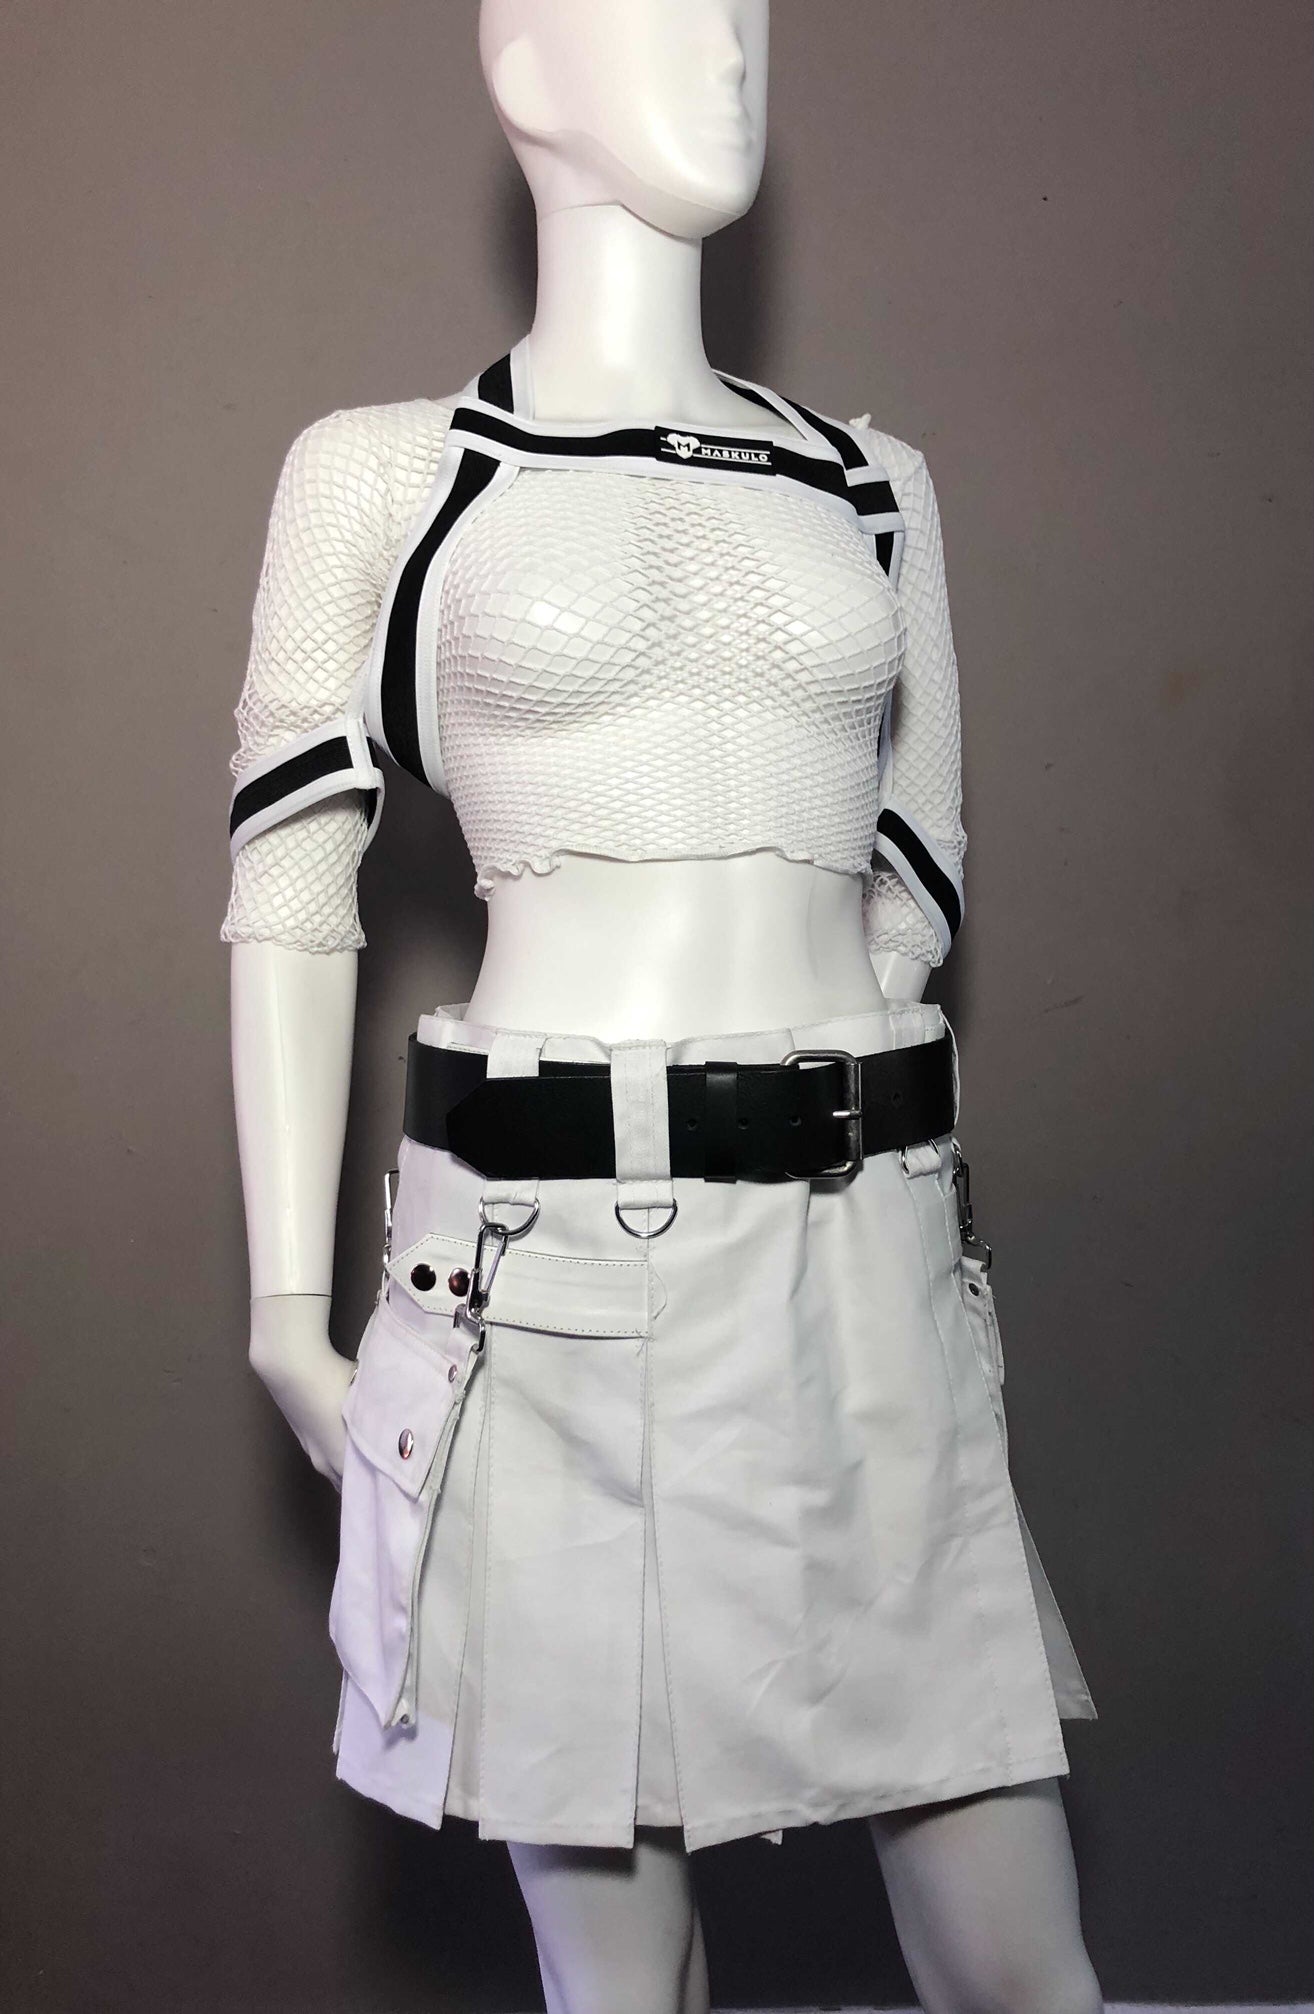 White Mini Heritage kilt on Mannequin with belt harness and net shirt, front view.